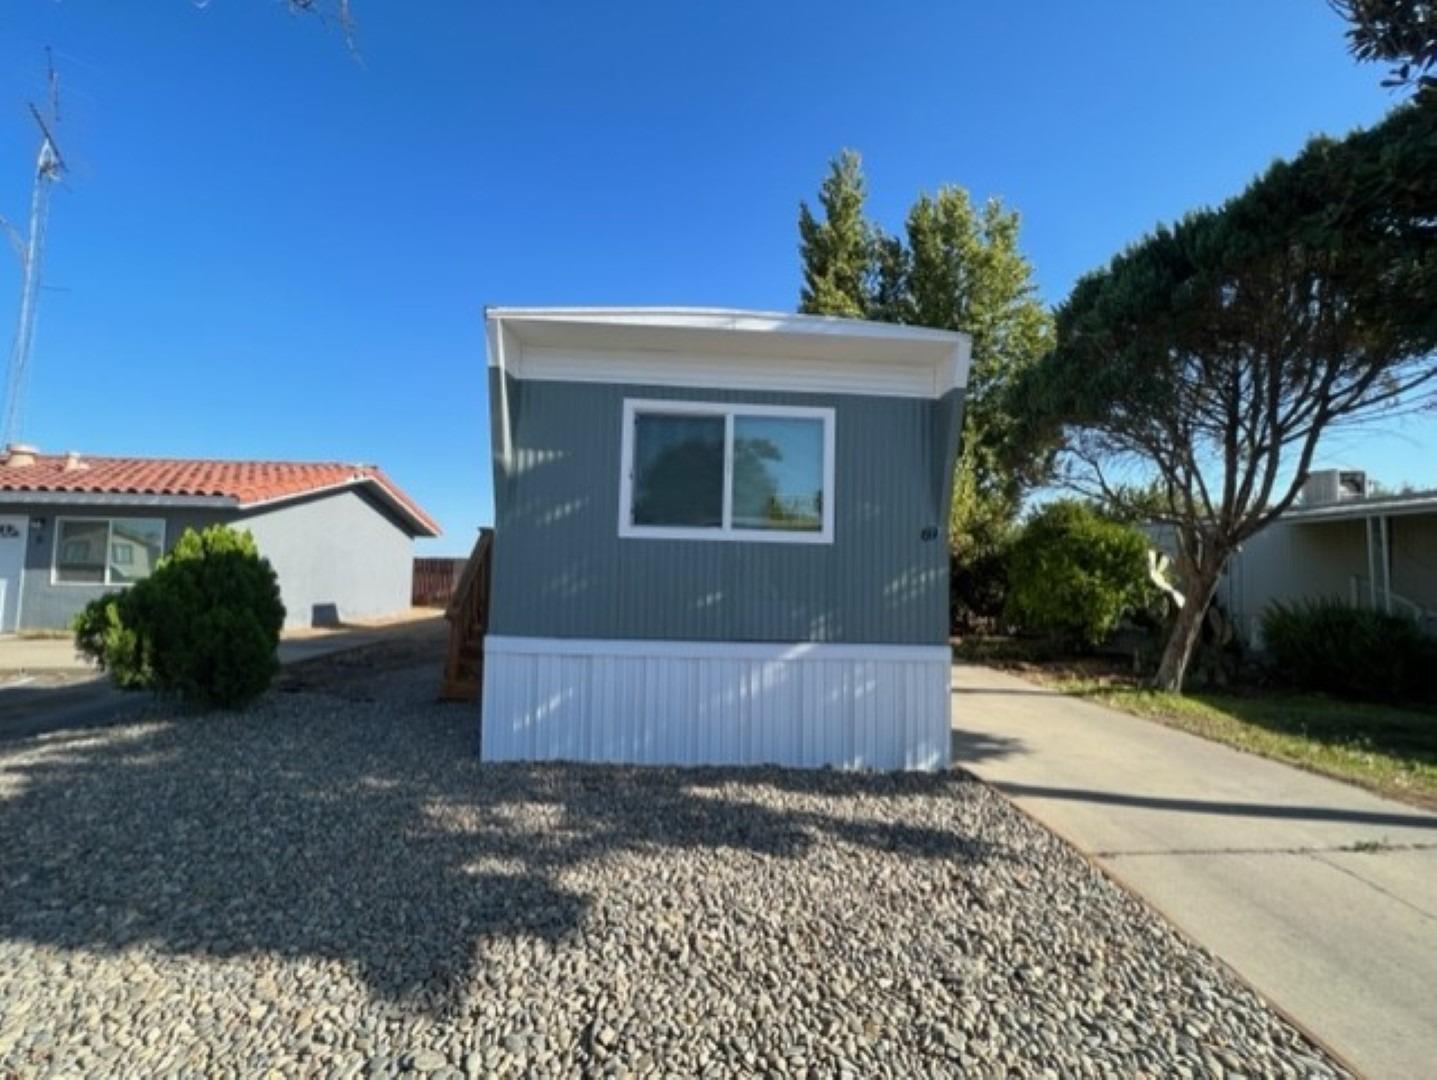 Photo of 4837 Faith Home Rd #69 in Ceres, CA